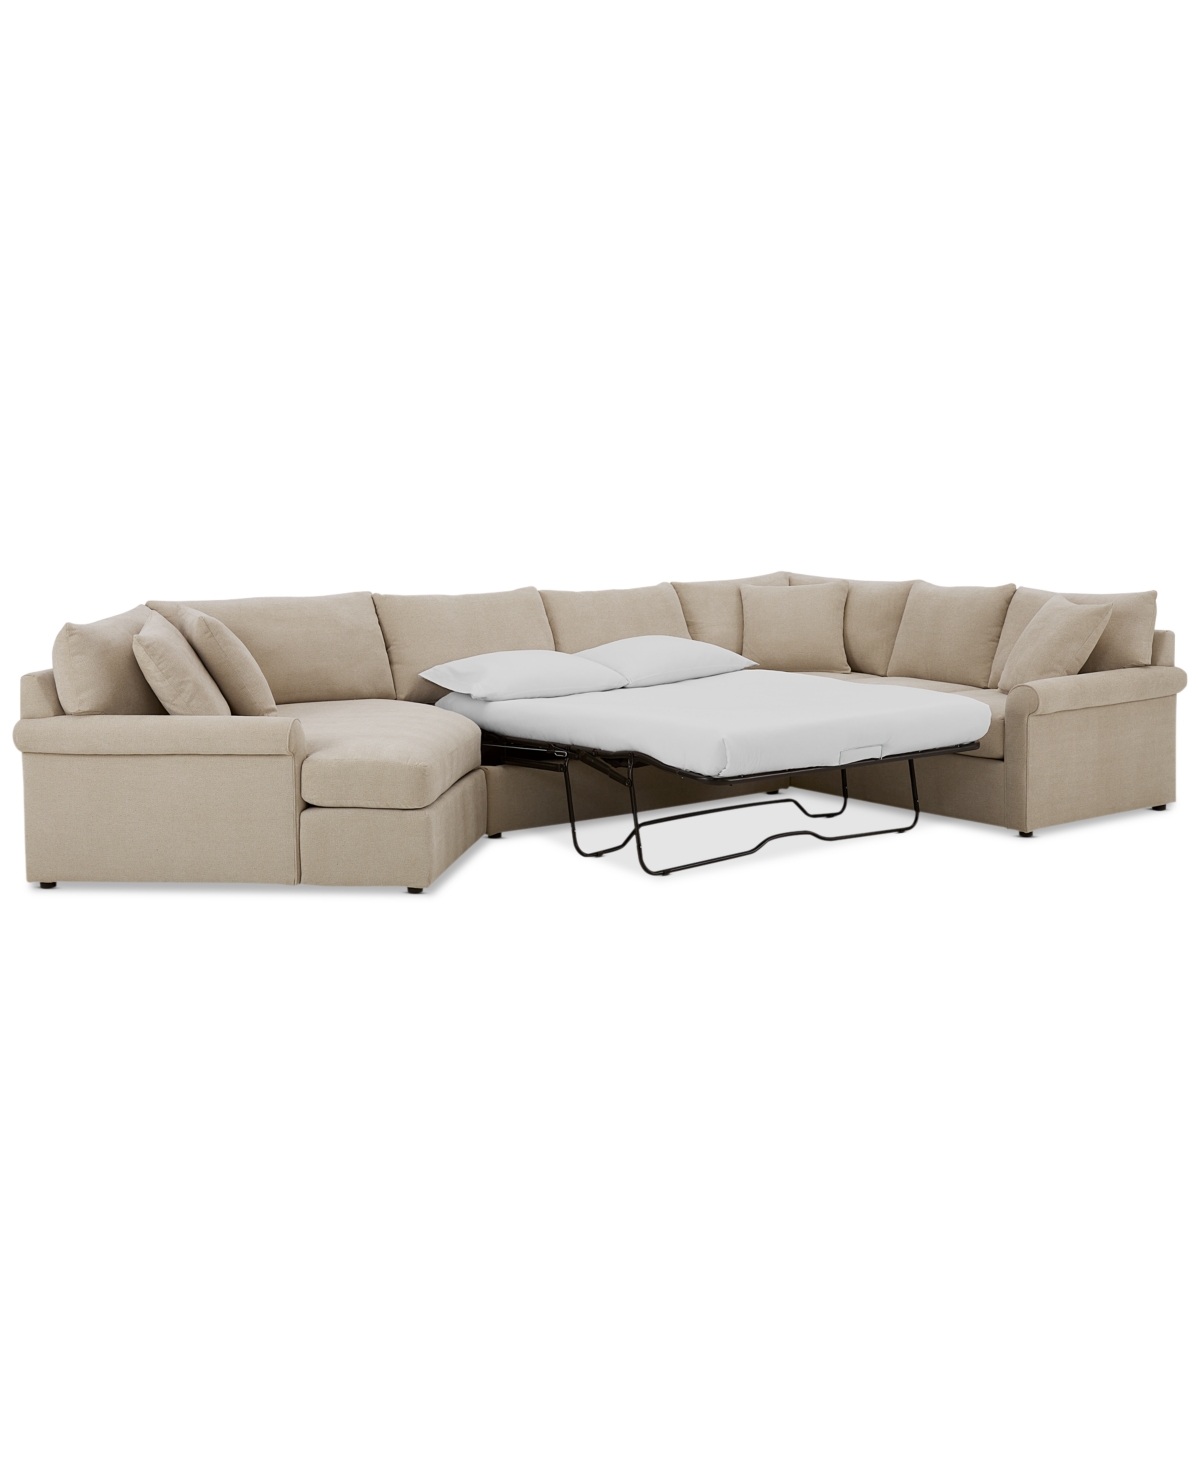 Furniture Wrenley 170" 3-pc. Fabric Sectional Full Sleeper Cuddler Chaise Sofa, Created For Macy's In Dove